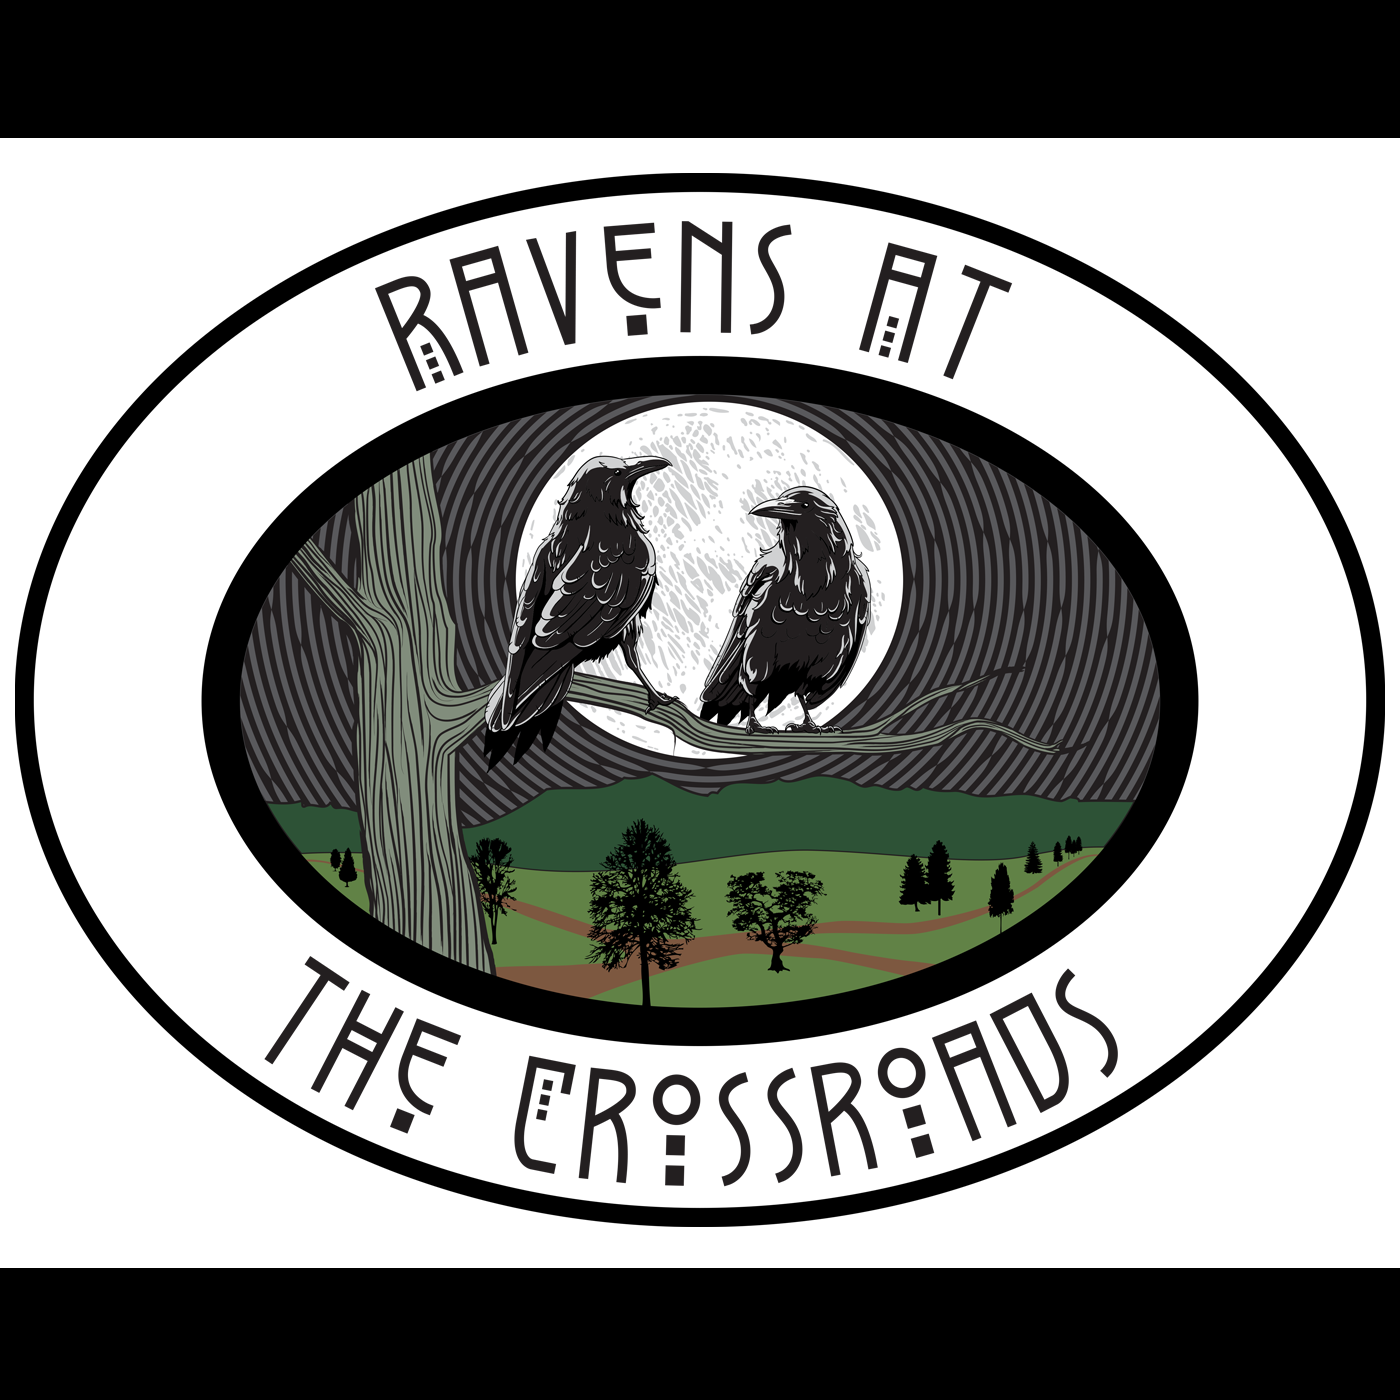 Ravens at the Crossroads